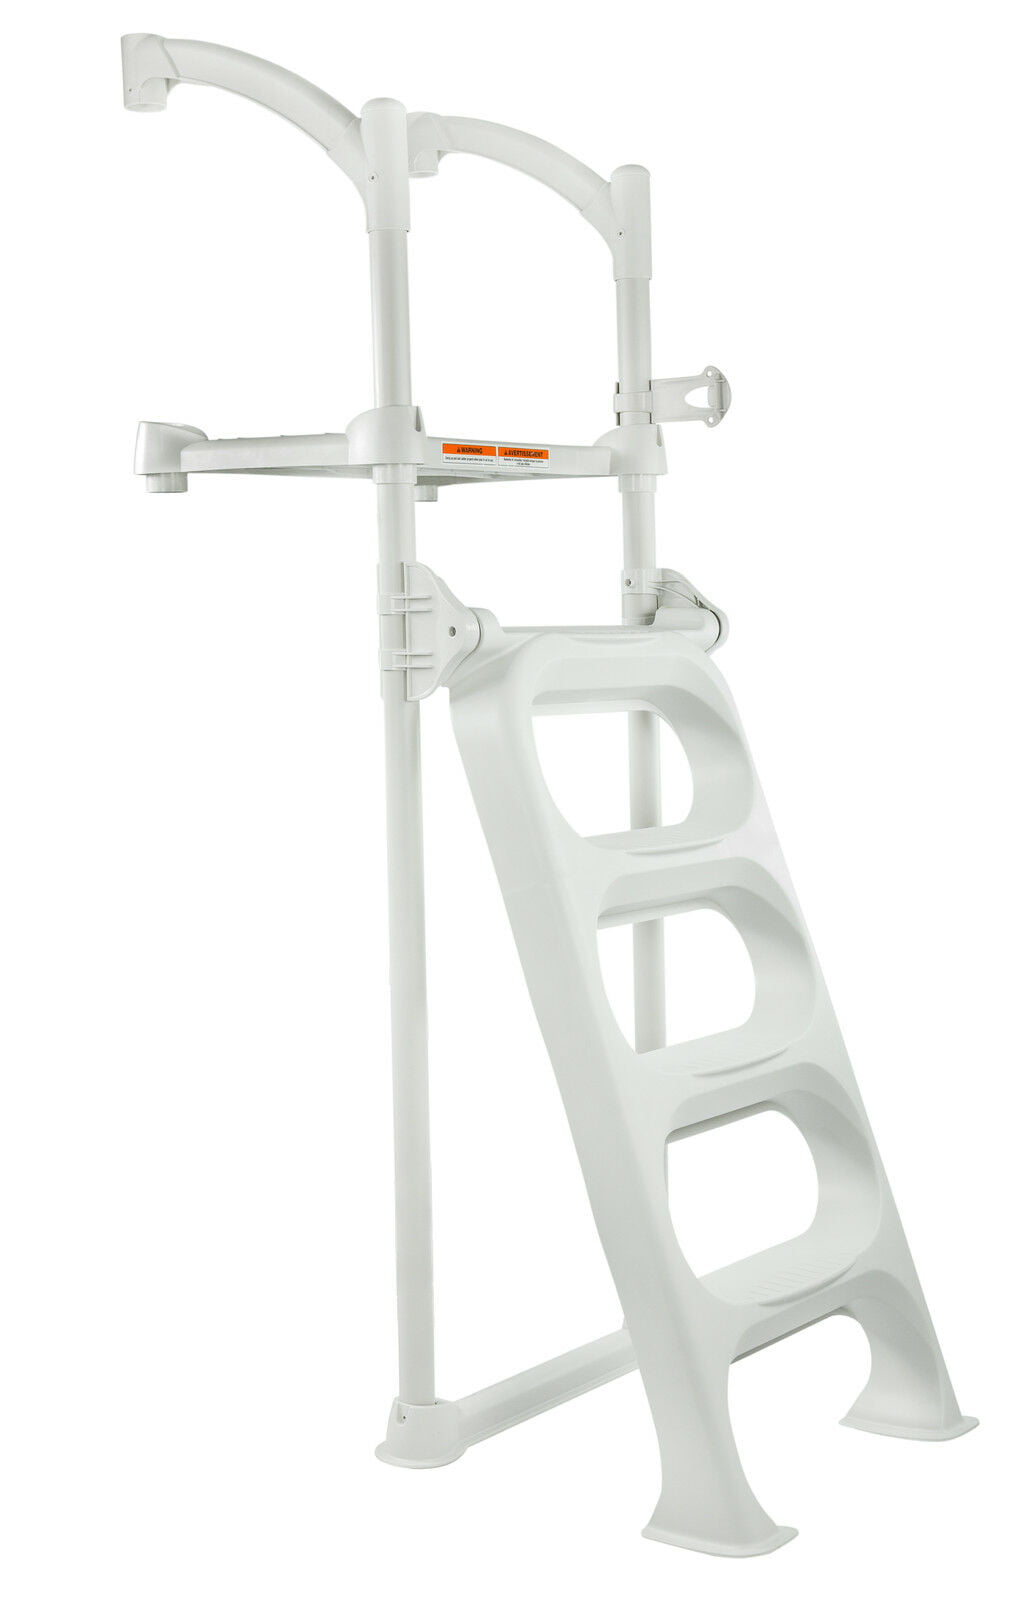 Unfade Memory Pool Ladder Step Above-Ground Pool Safety Ladders with 3 Steps 42.1 